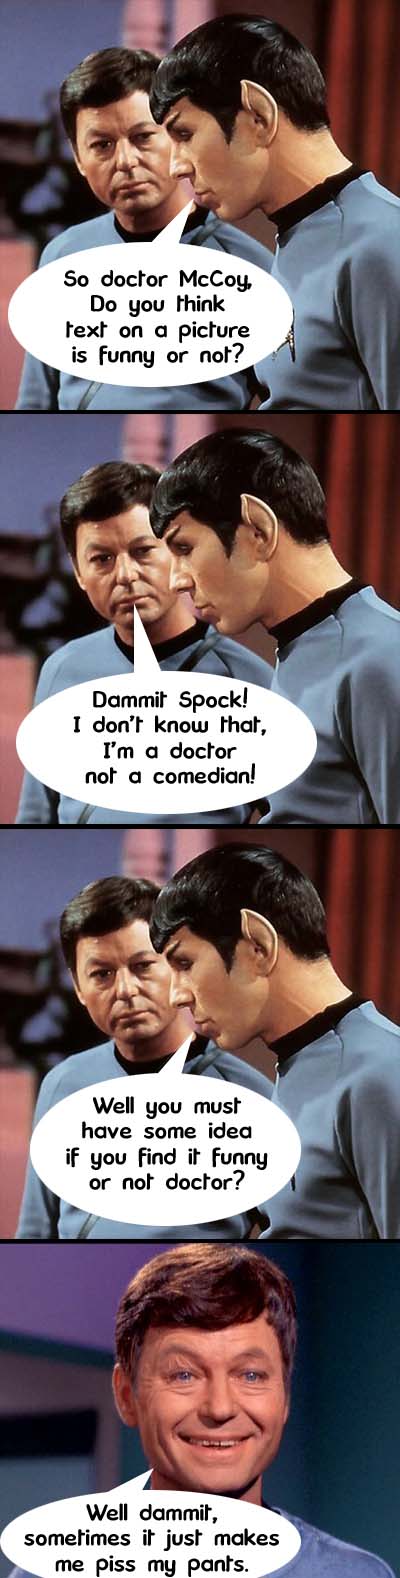 spock_mcmoy_toap.jpg